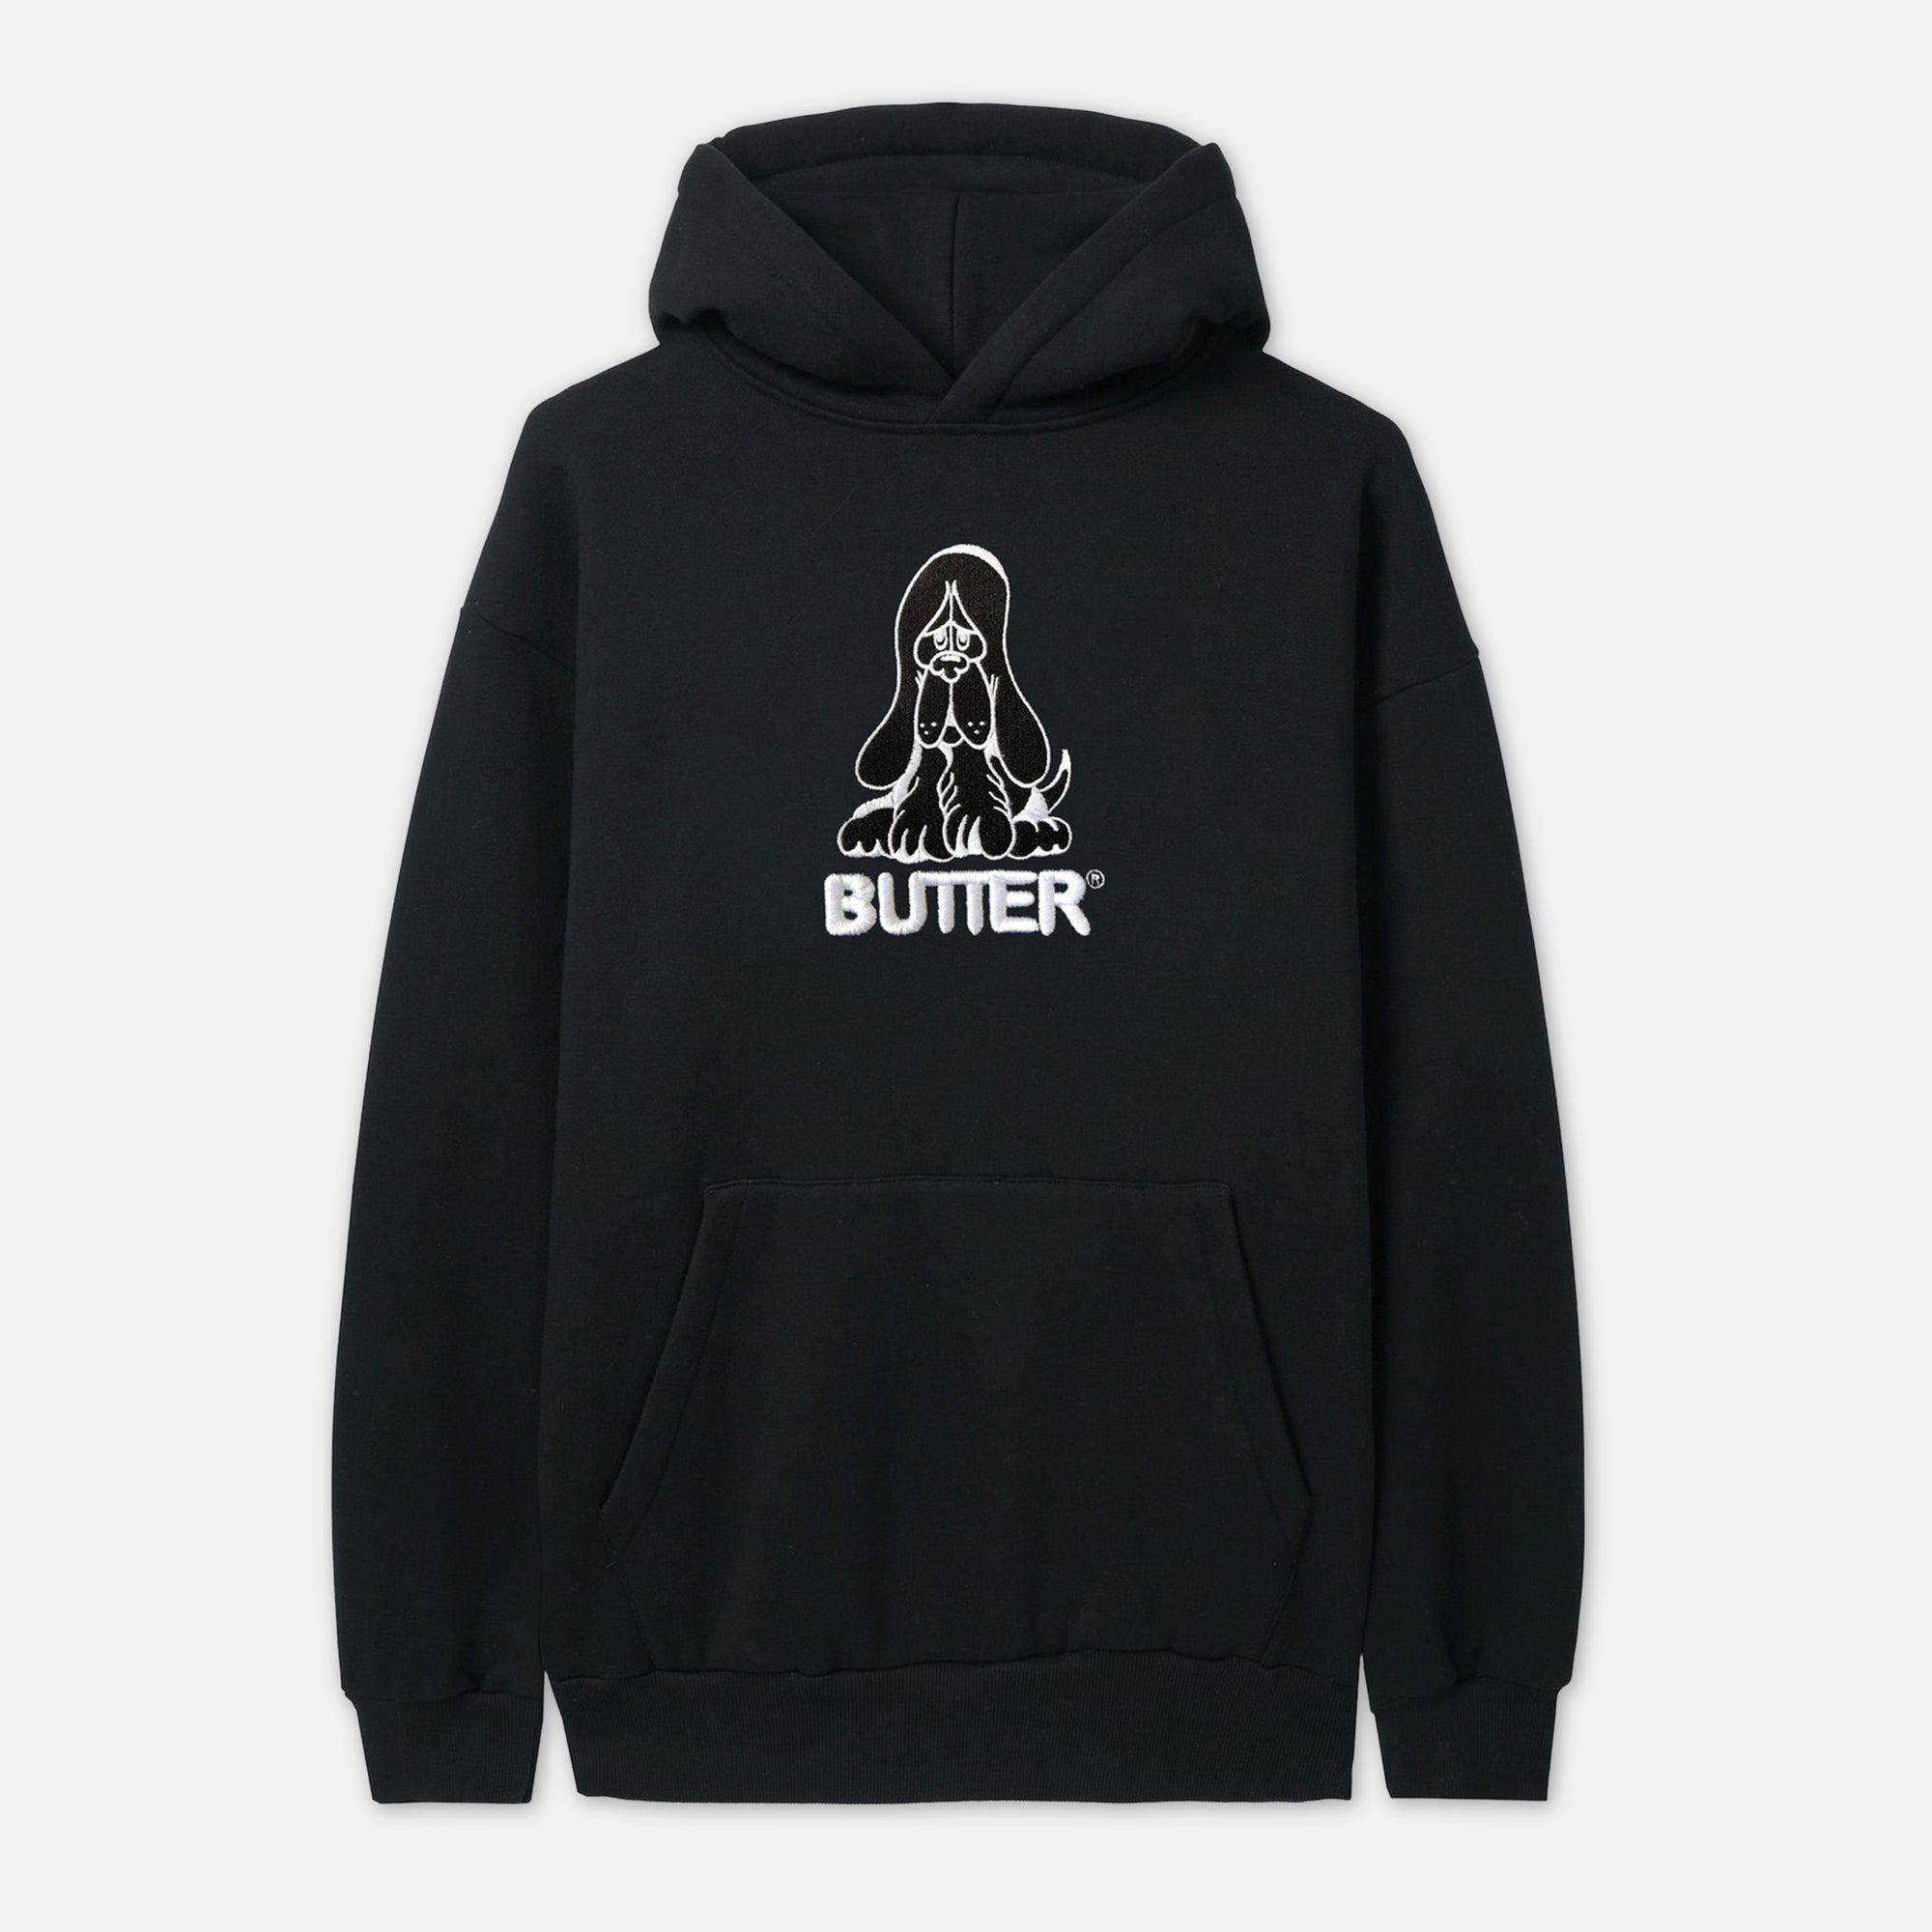 Butter Goods - Hound Embroidered Pullover Hooded Sweatshirt - Black